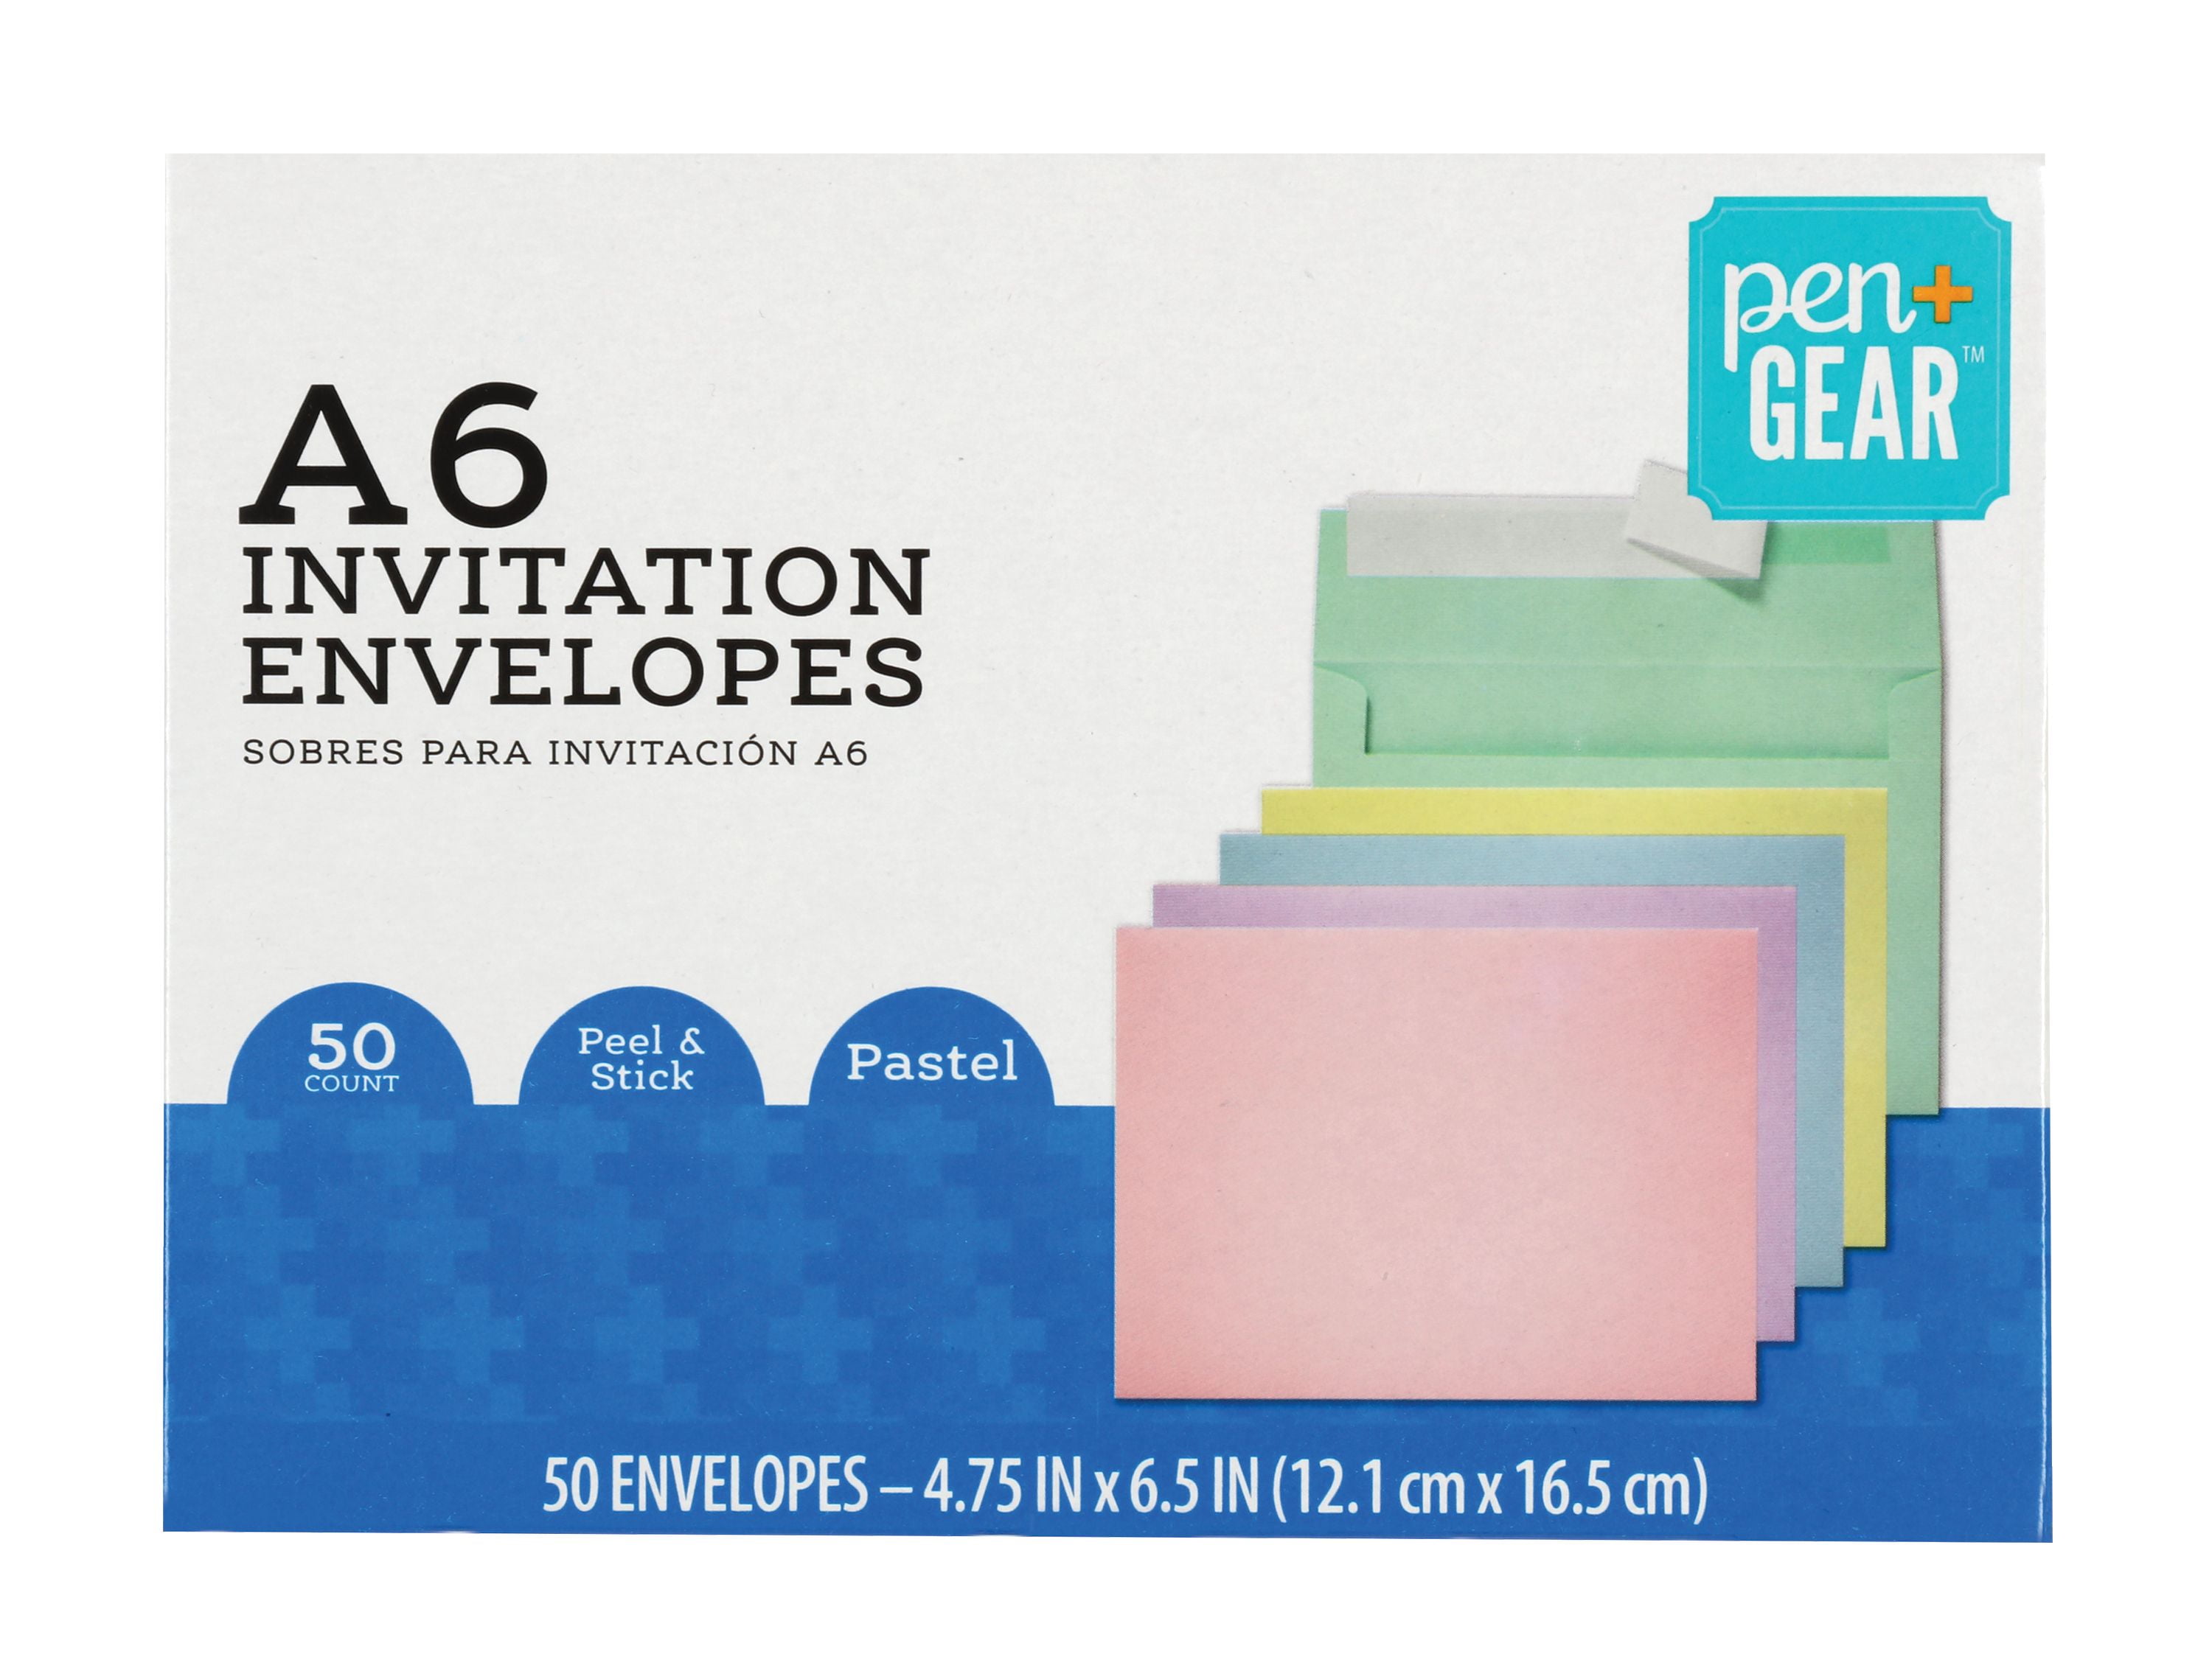 Peel & Seal Pastel Pink Invitation Envelopes Baby Pink 4 1/2 x 6 3/8 Inches 101-76 80lb Paper Blake Creative Color - Pack of 500 